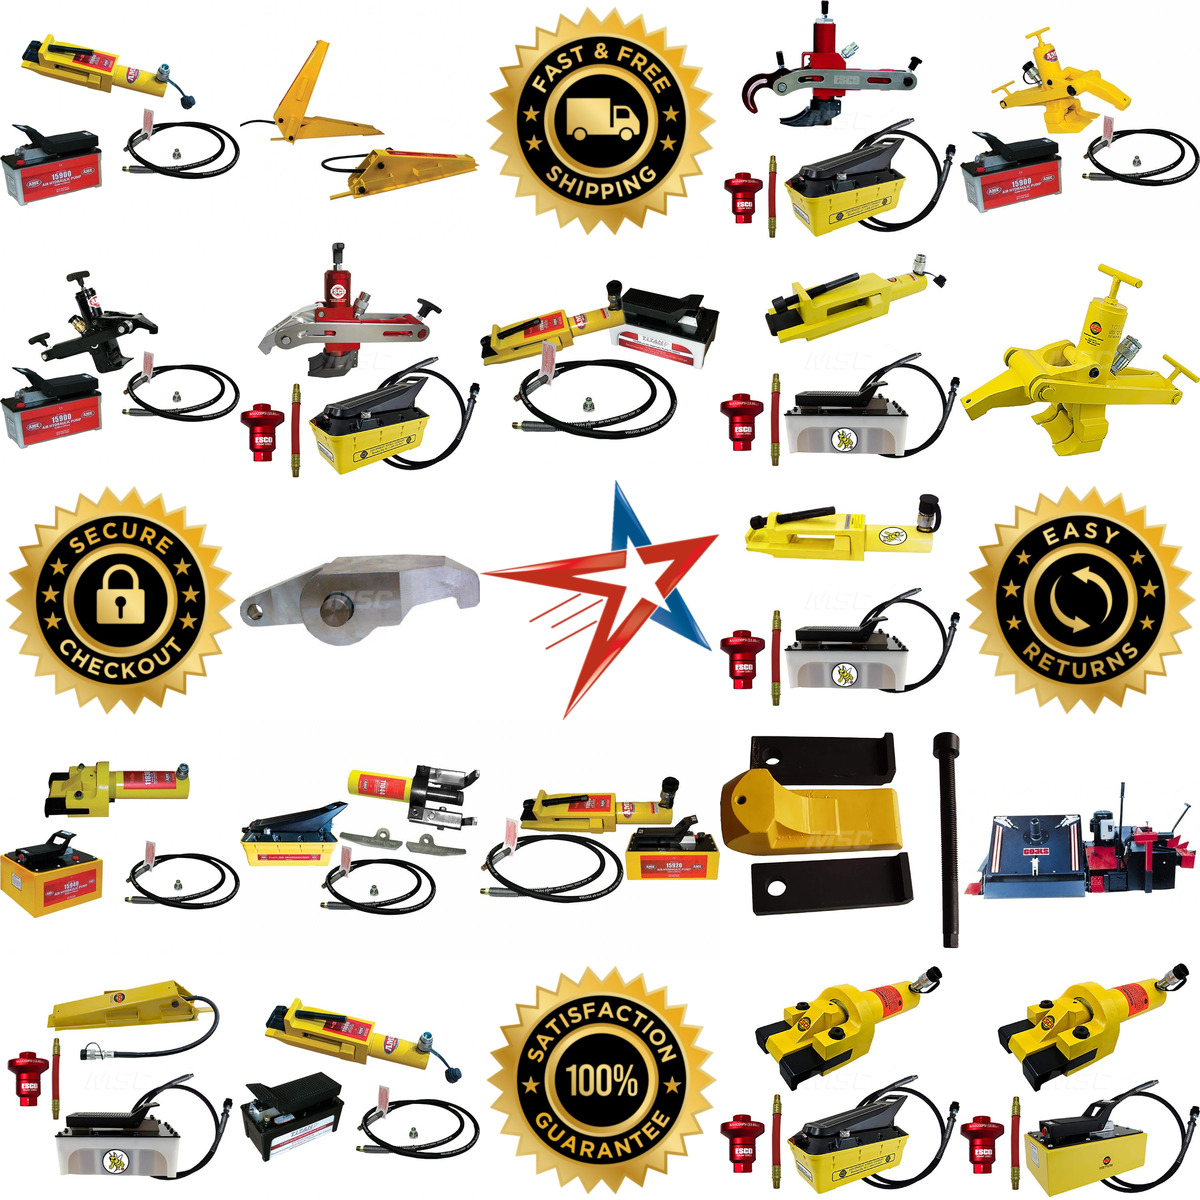 A selection of Tire Changers and Balancers products on GoVets